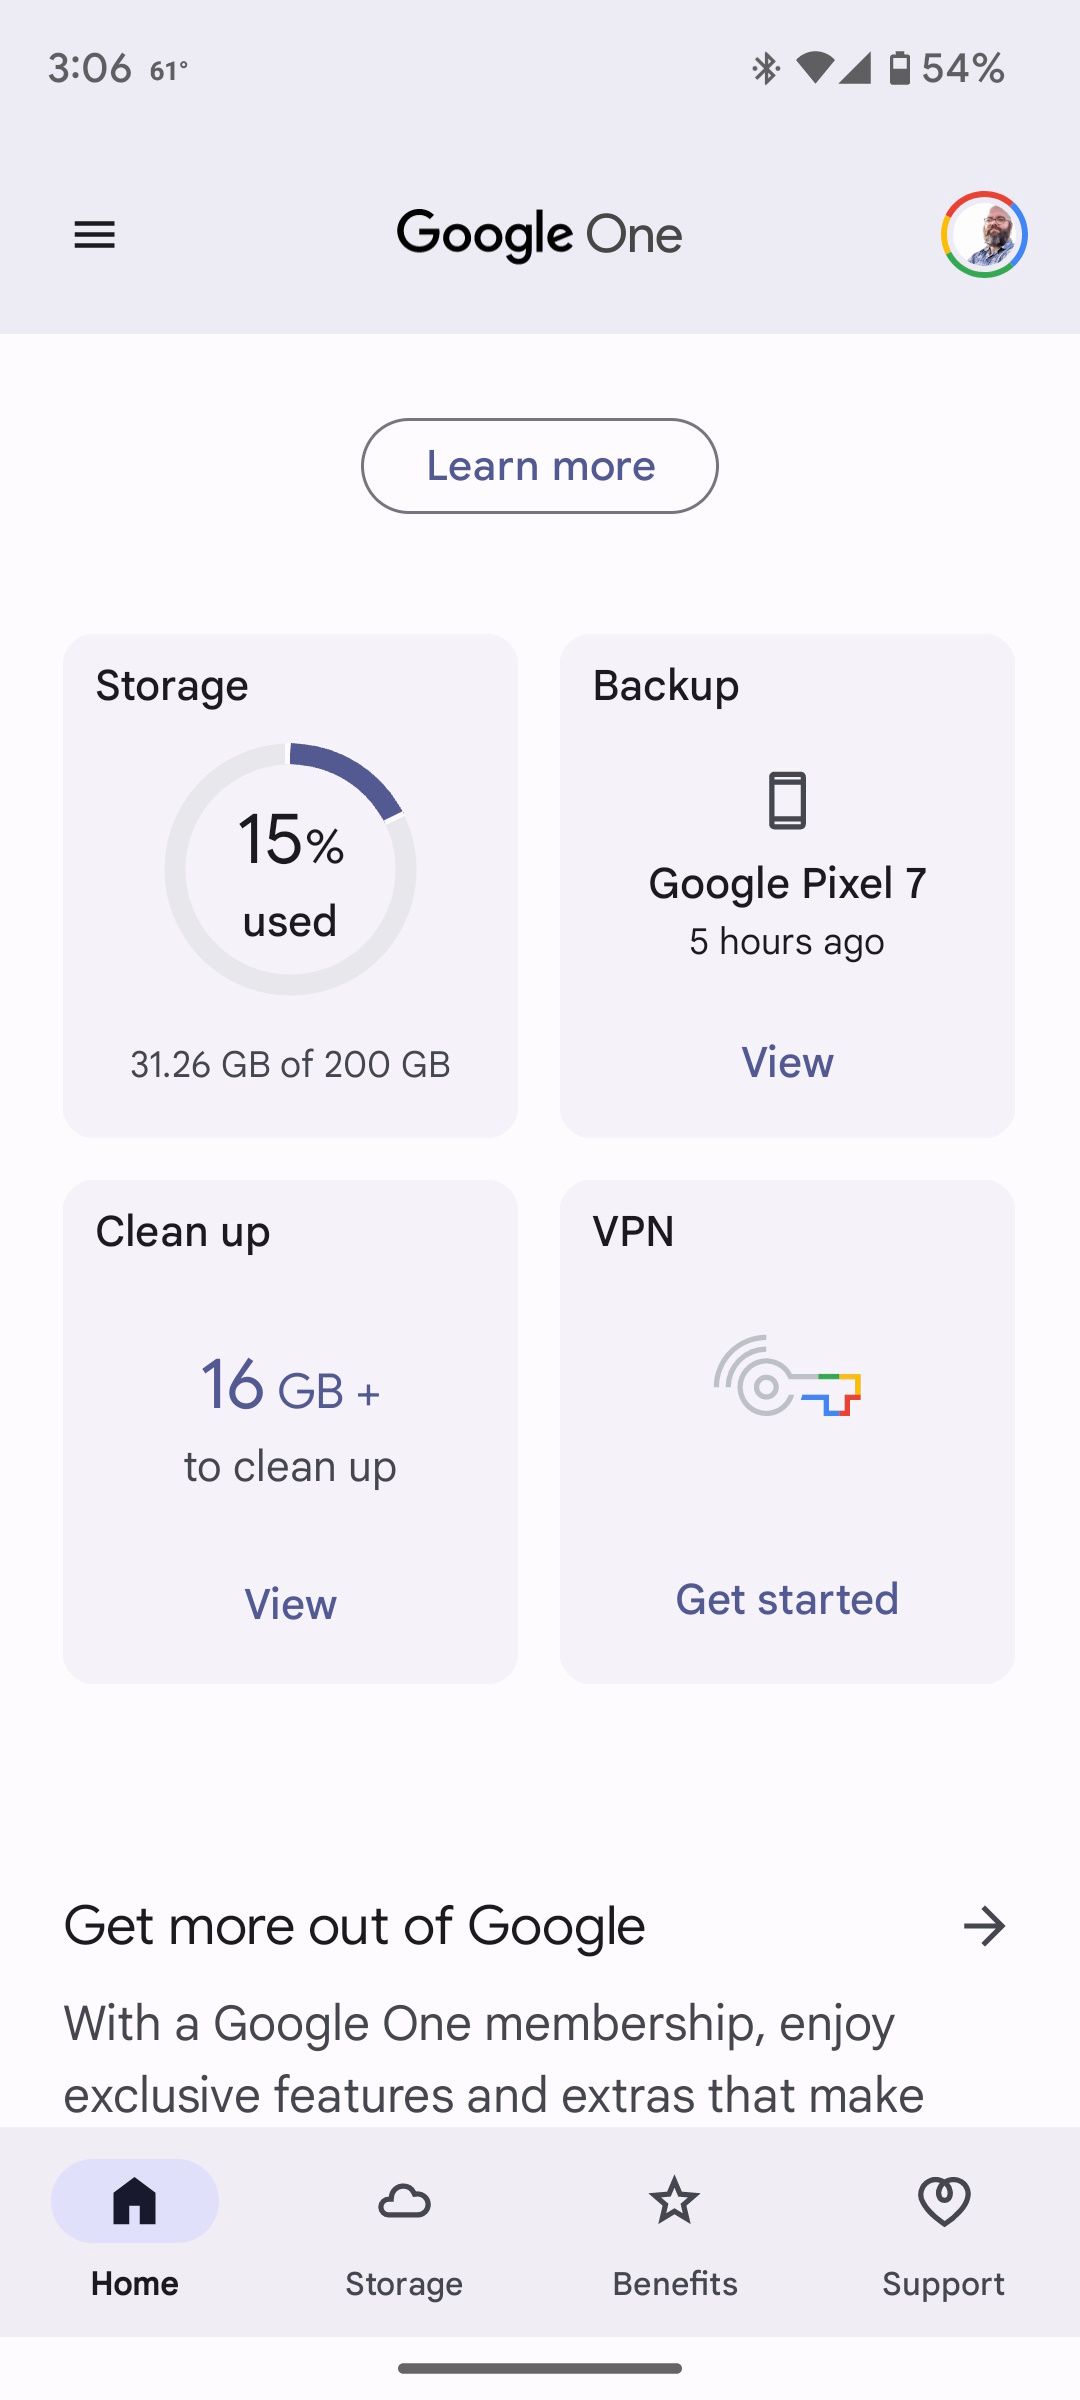 The main screen of Google One, with the Get Started option for VPN by Google One